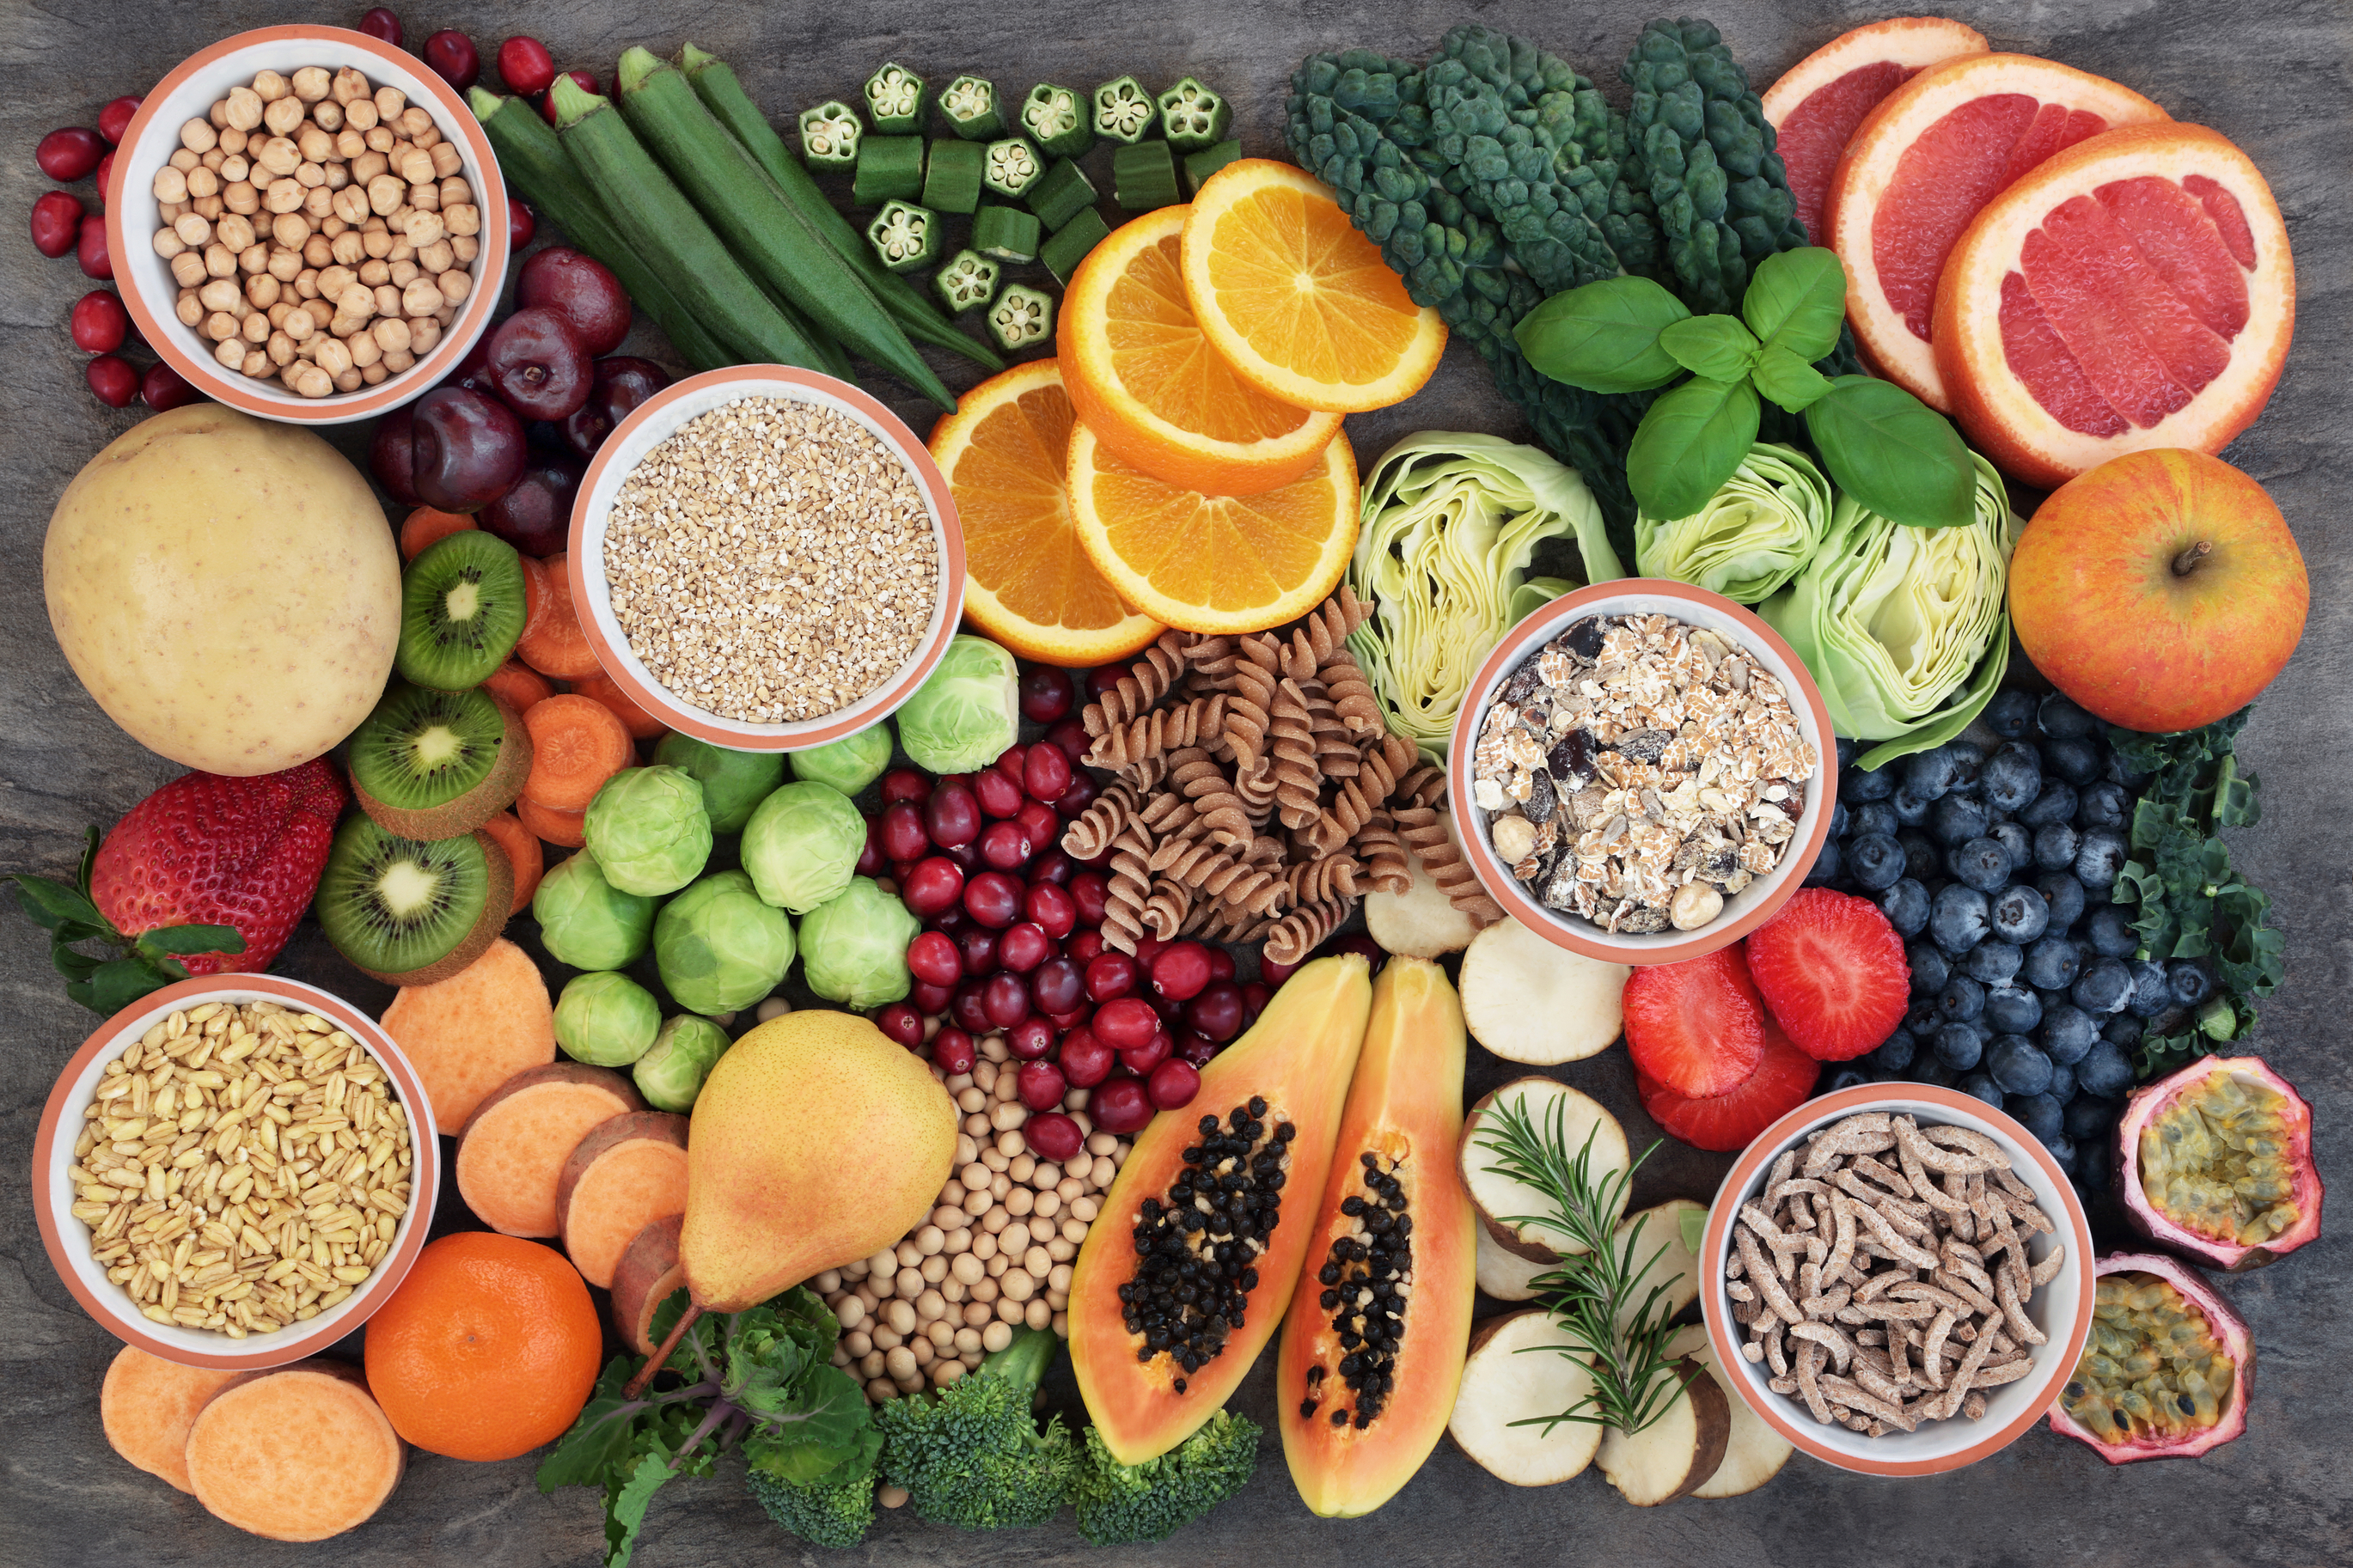 Fruits, vegetables and grains